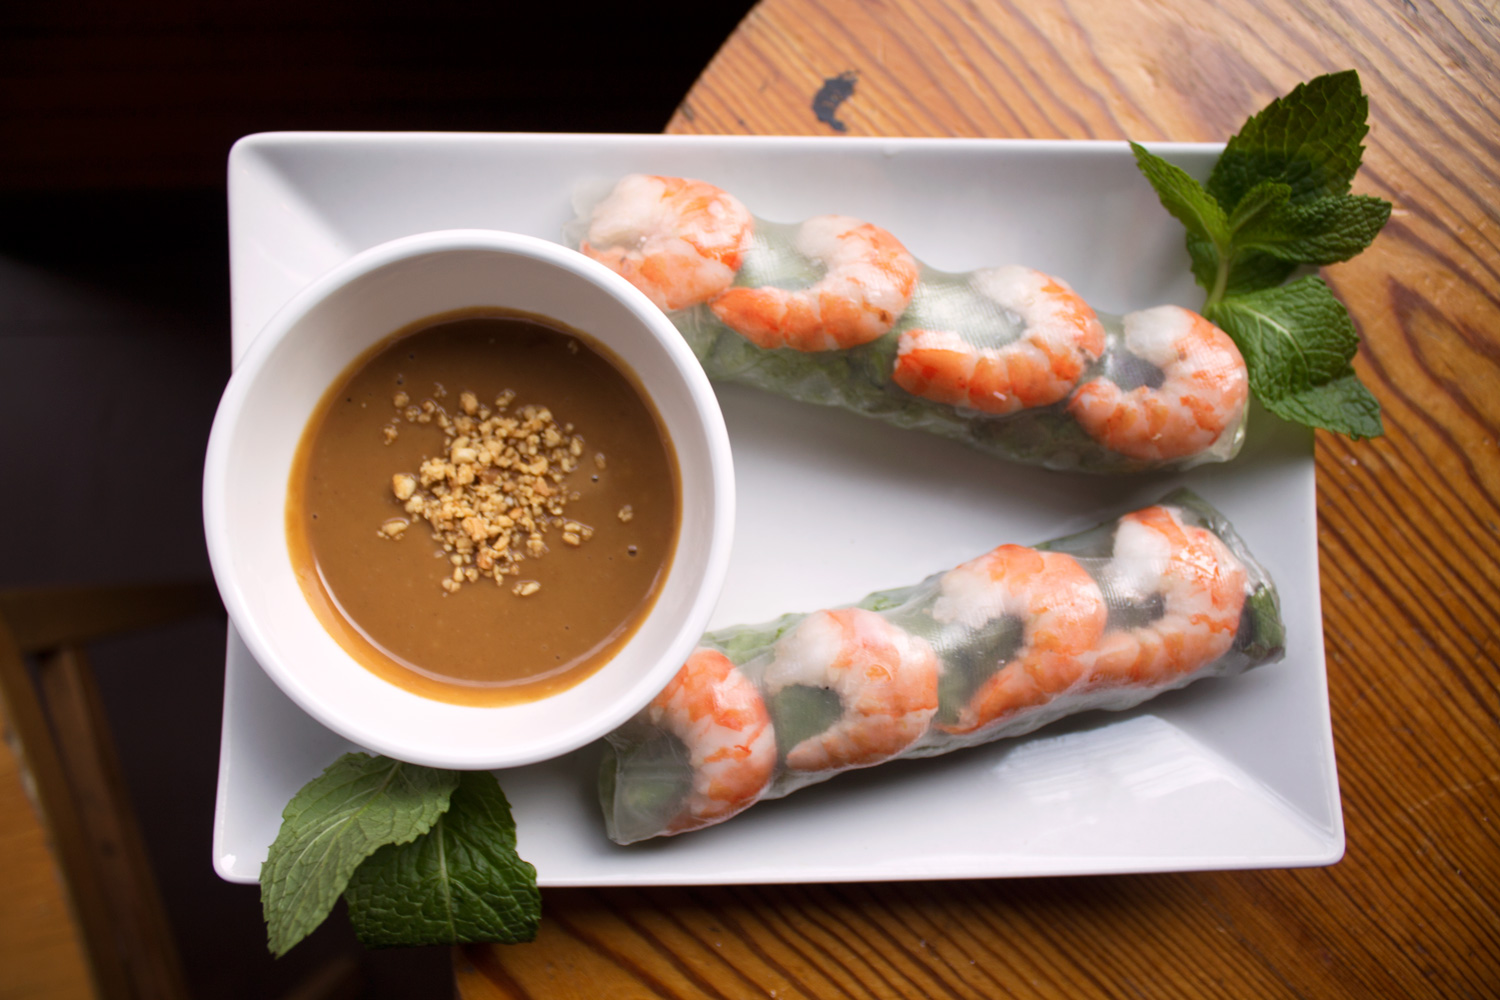 Shrimp summer rolls wrapped in rice paper with hoisin sauce